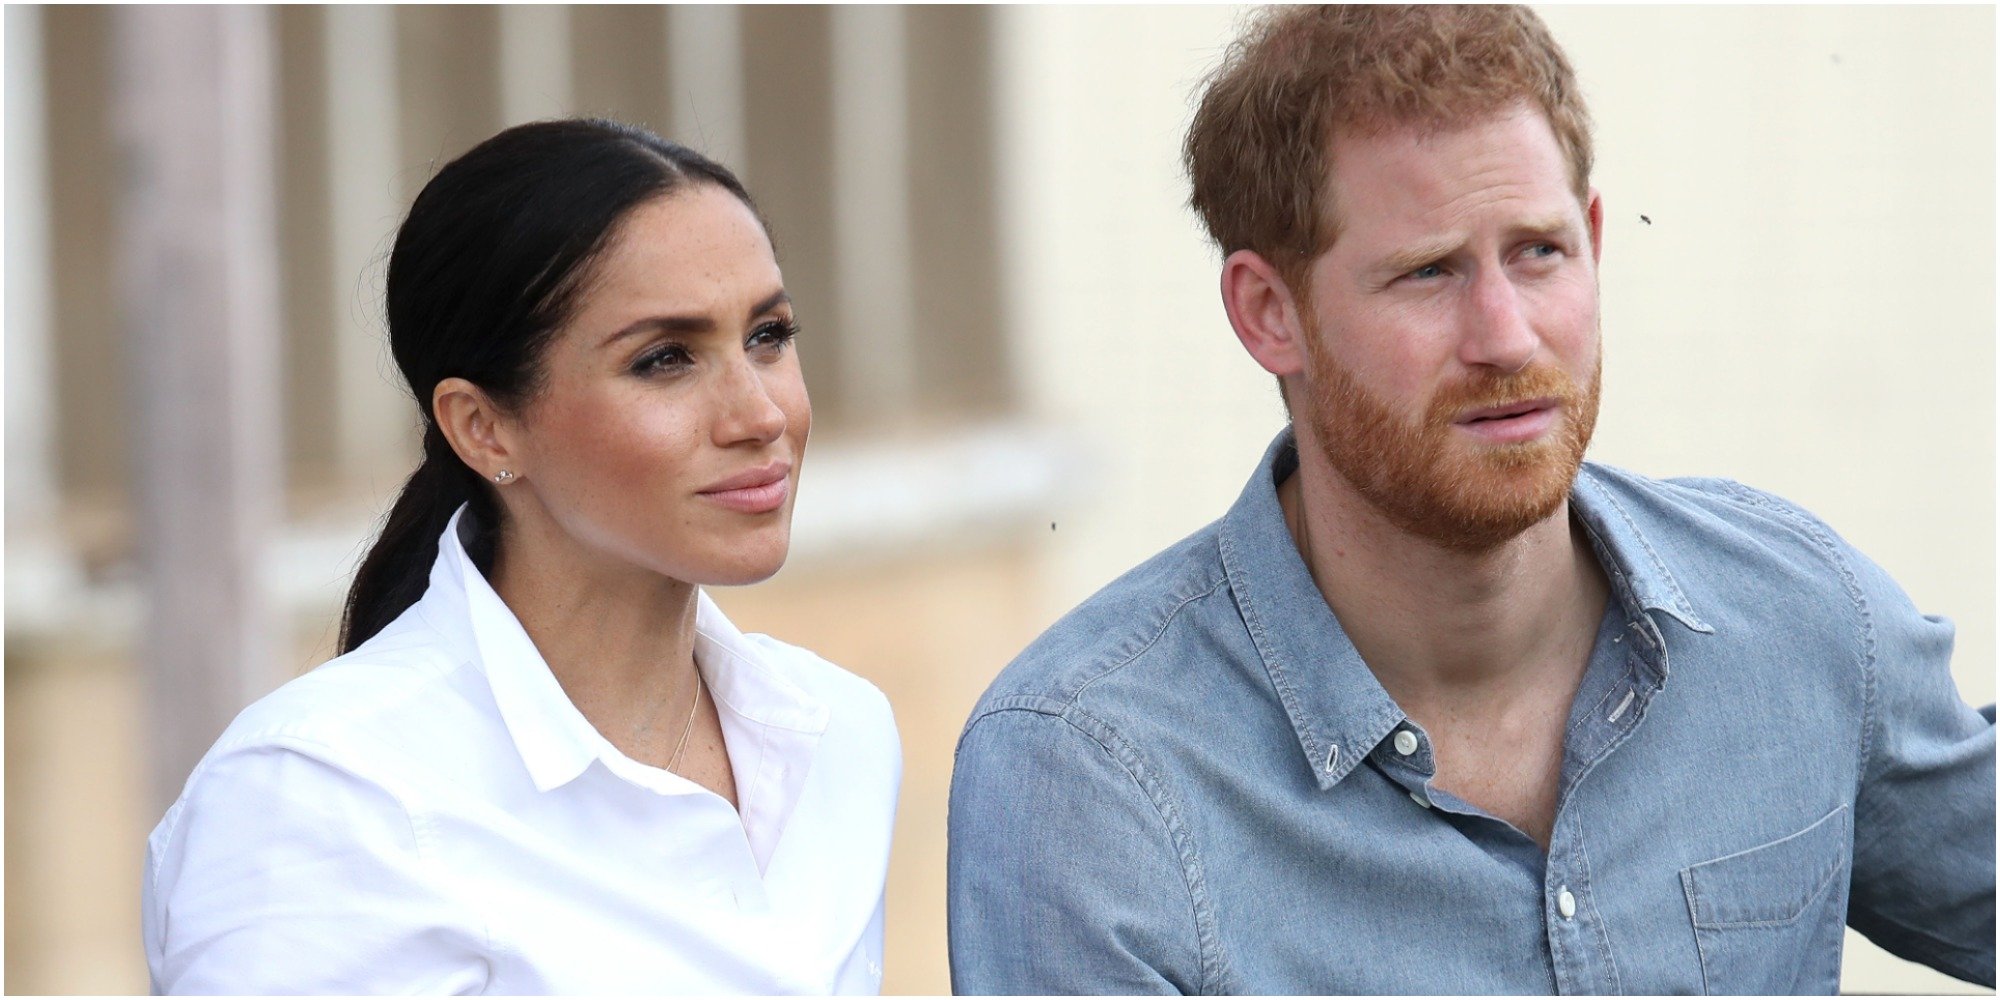 Meghan Markle and Prince Harry look